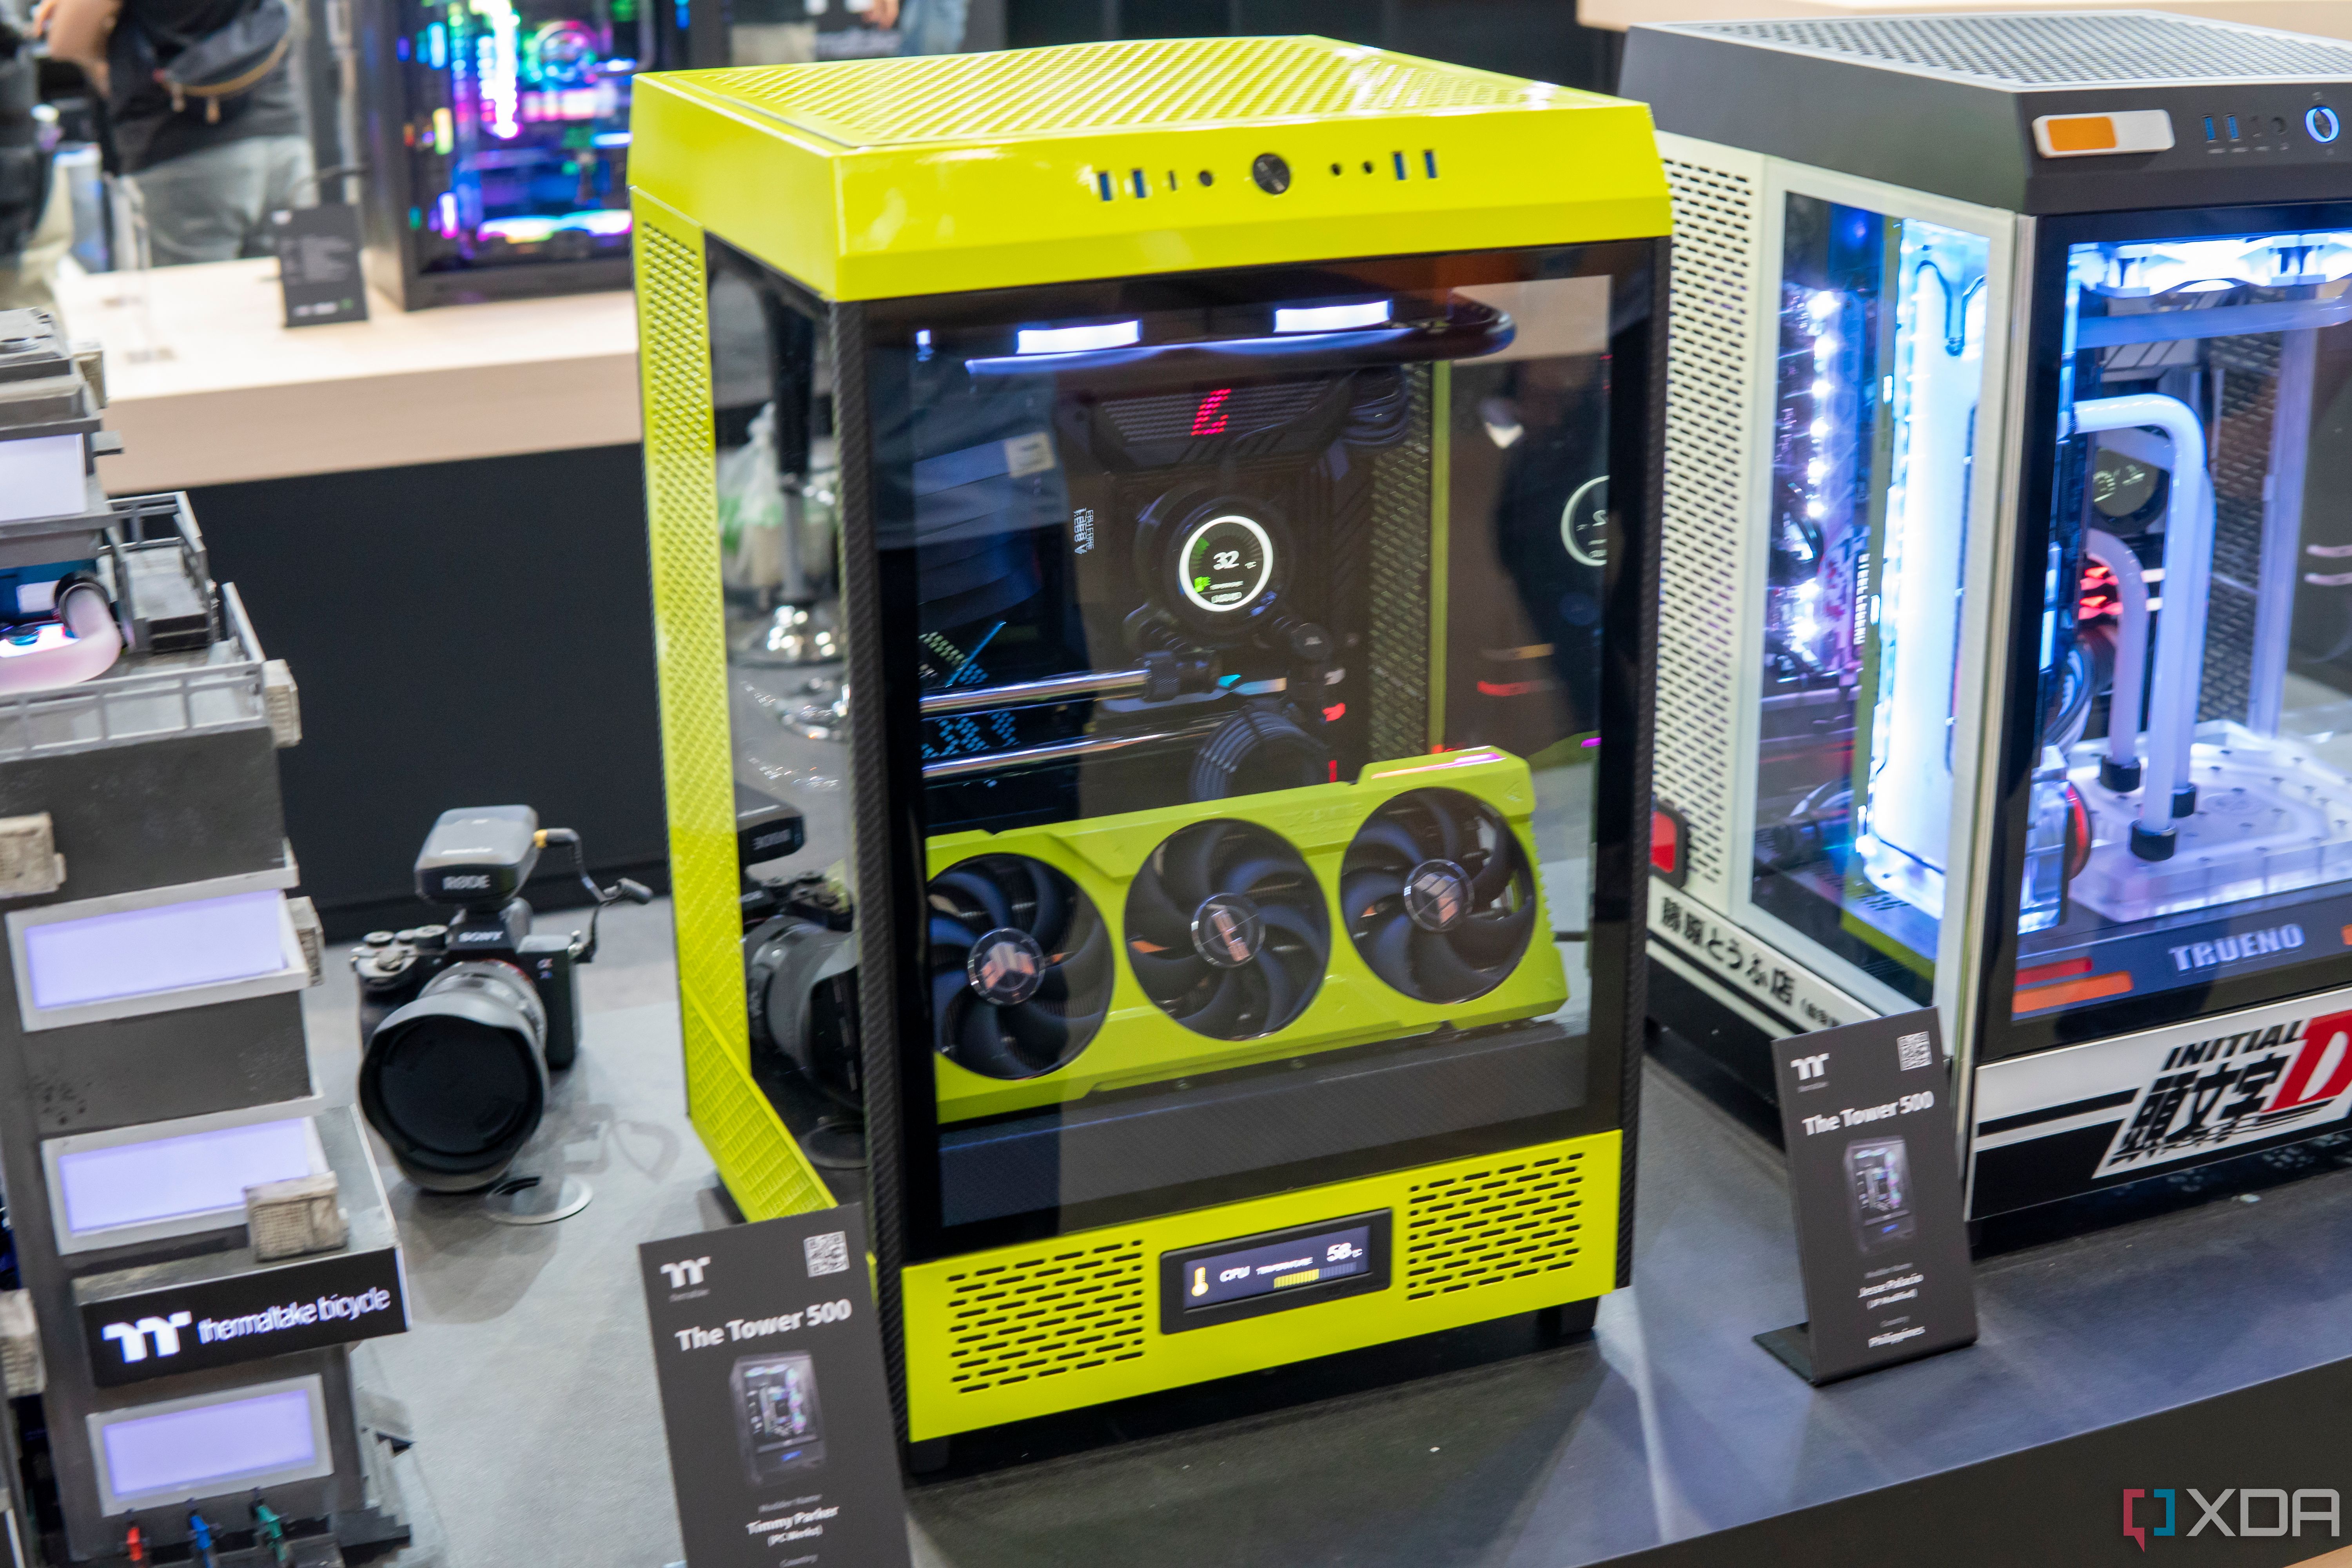 A custom PC based on Thermaltake's The Tower 500 case  modified with a lime green chassis. The installed GPU is also colored lime green